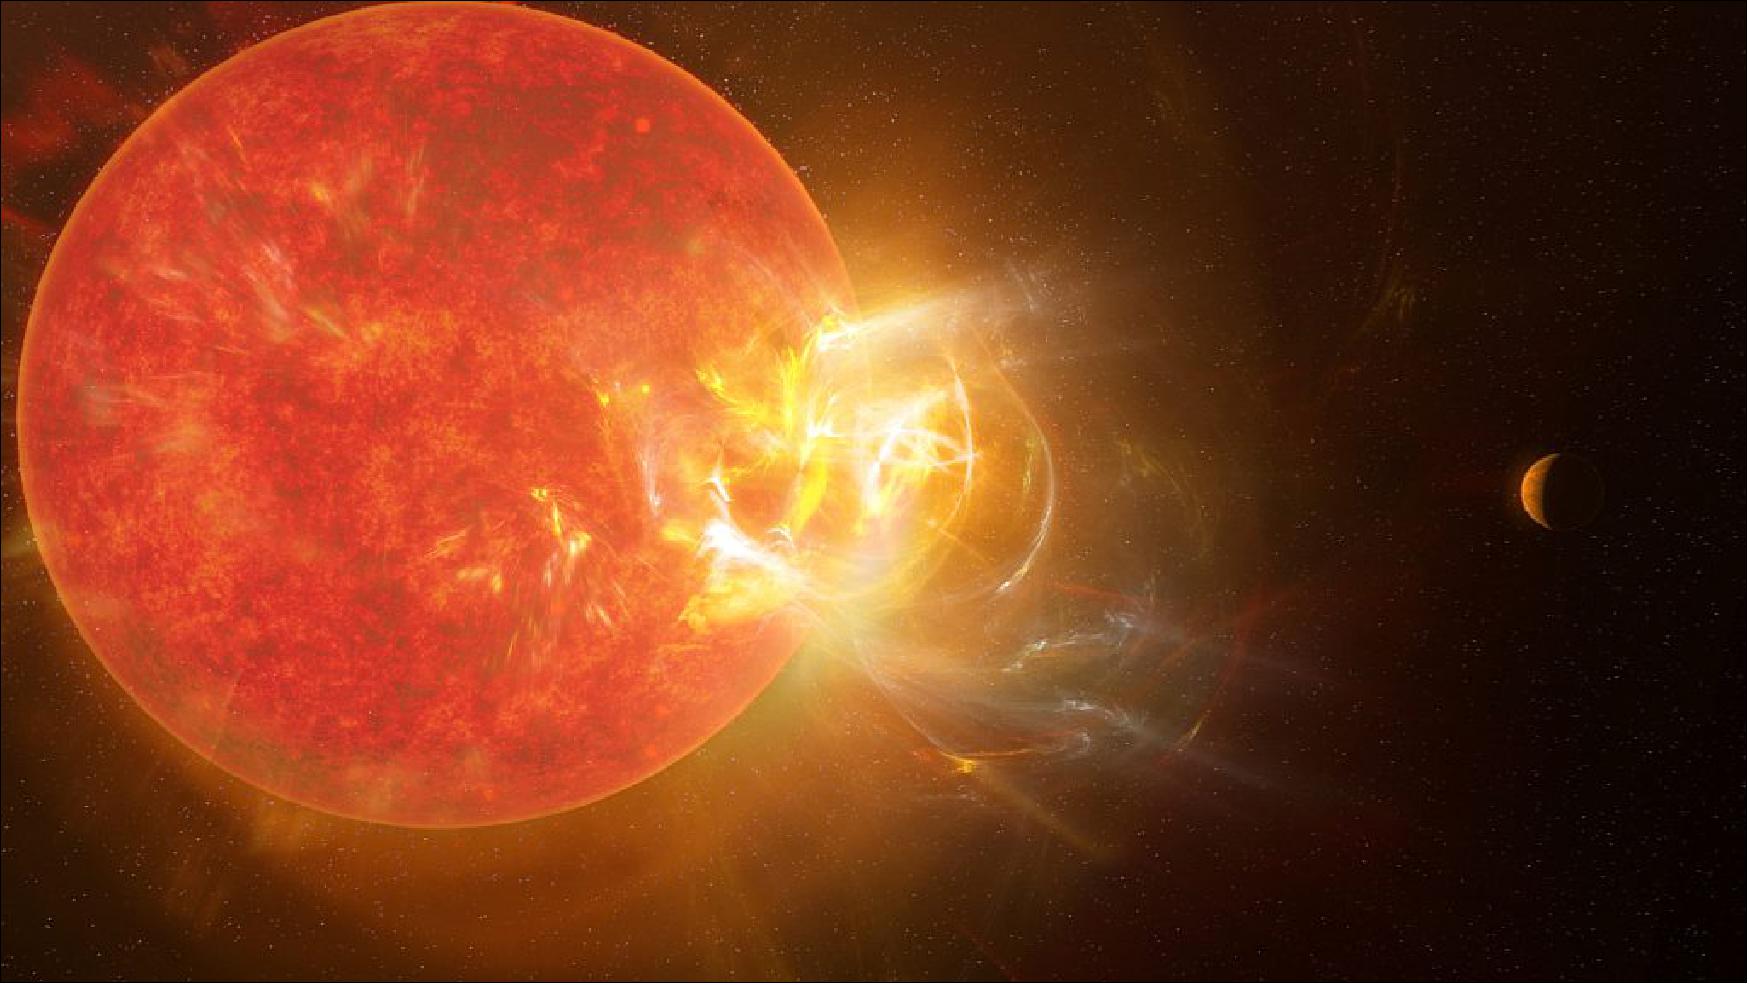 Figure 24: Artist's conception of the violent stellar flare from Proxima Centauri discovered by scientists in 2019 using nine telescopes across the electromagnetic spectrum, including the Atacama Large Millimeter/submillimeter Array (ALMA). Powerful flares eject from Proxima Centauri with regularity, impacting the star's planets almost daily (image credit: S. Dagnello, NRAO/AUI/NSF)